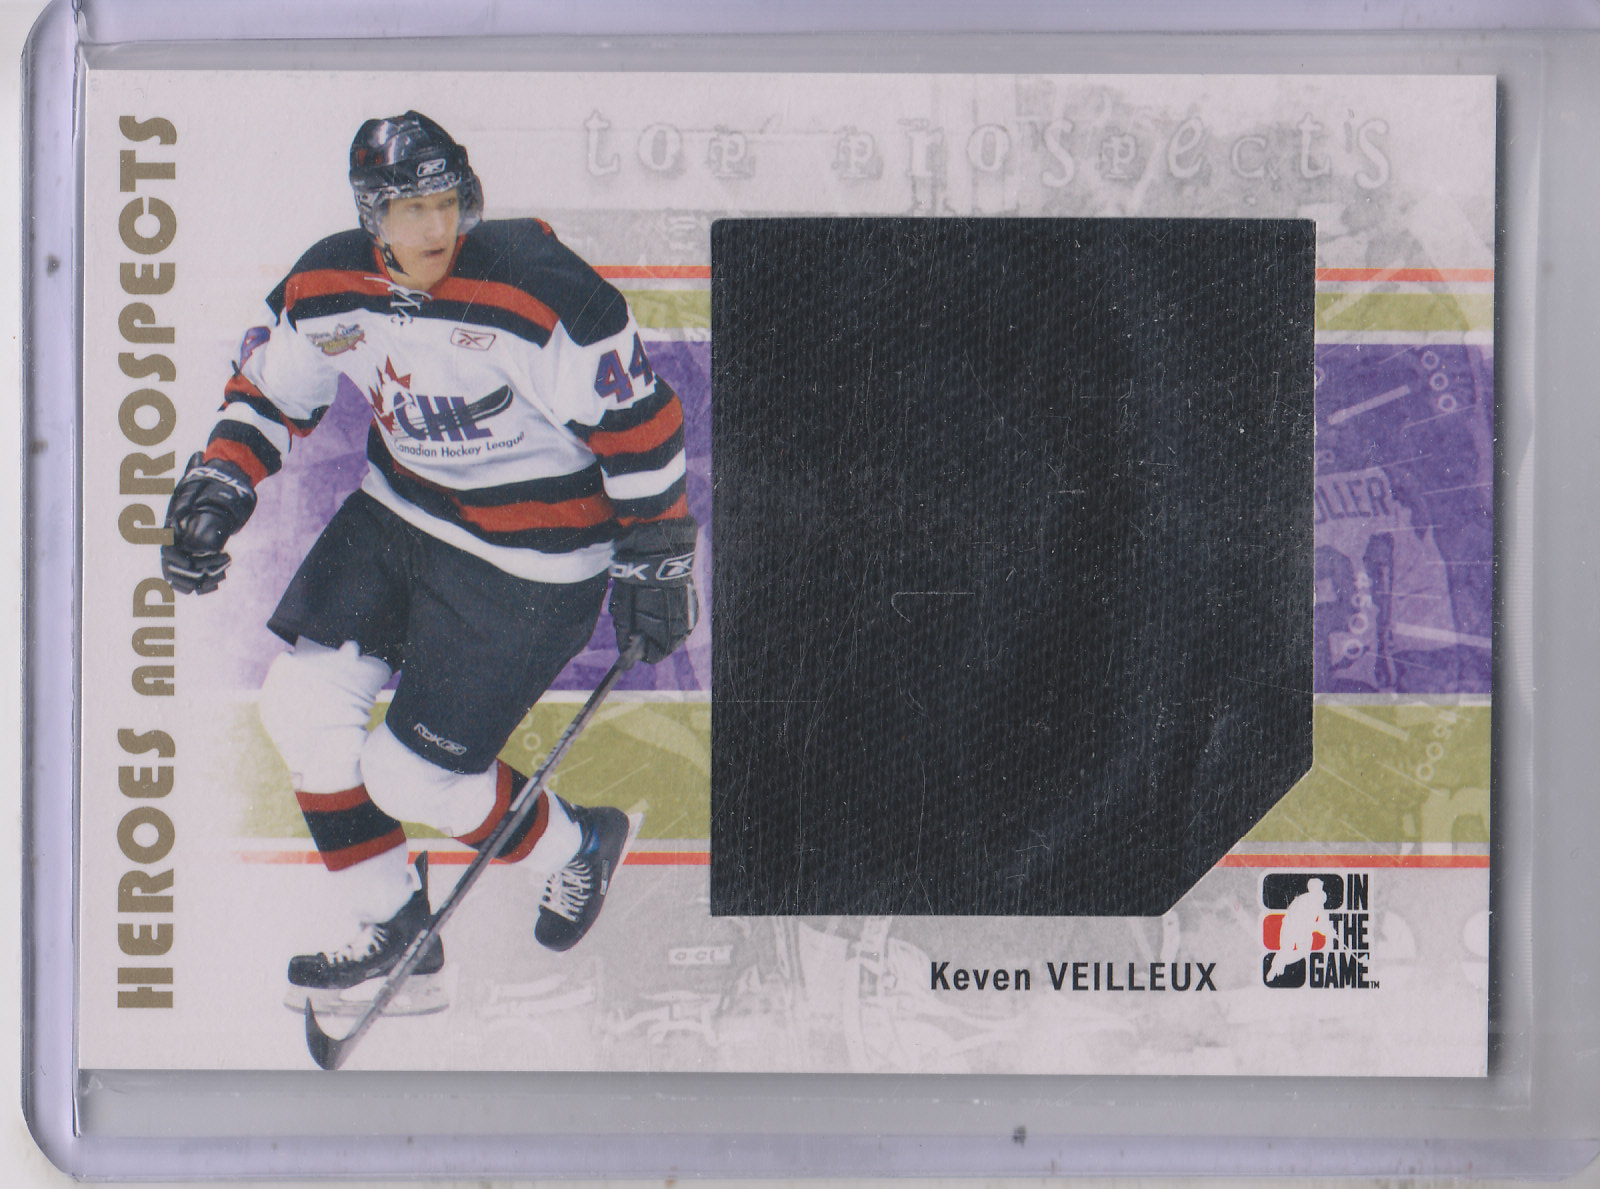 2007-08 ITG Heroes and Prospects #122 Keven Veilleux TP JSY